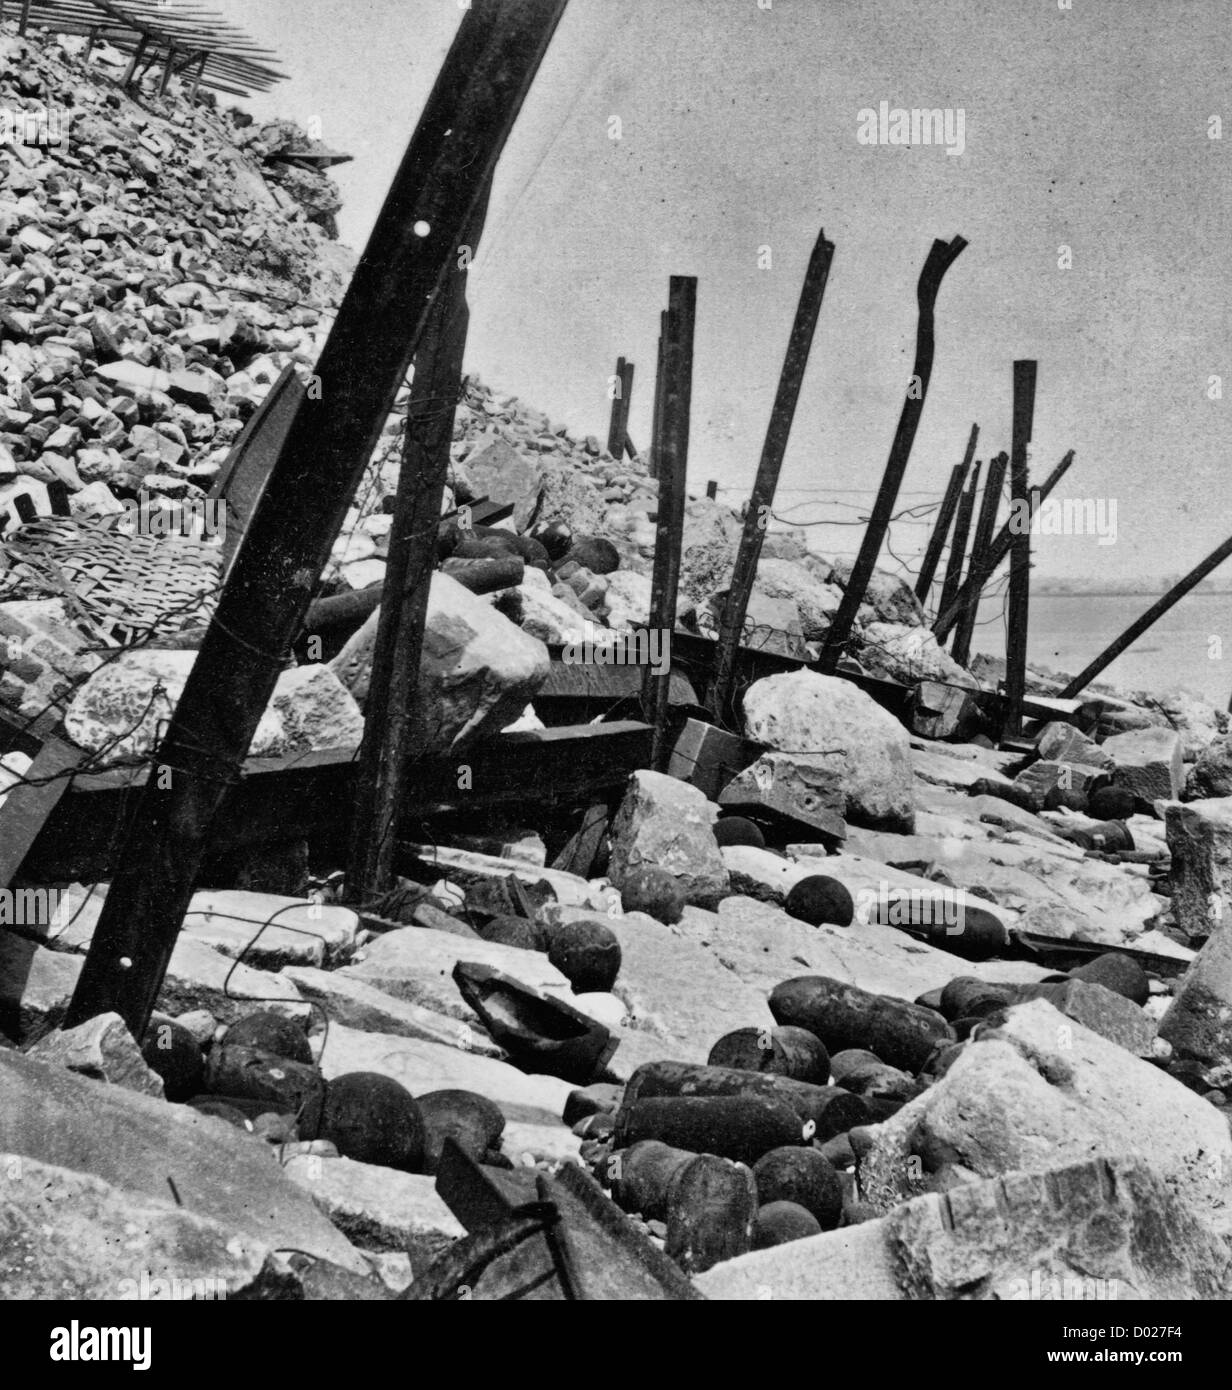 Outside view, Fort Sumter, 1865 Photograph shows ruins of artillery among the rocks on the exterior of Fort Sumter. Stock Photo